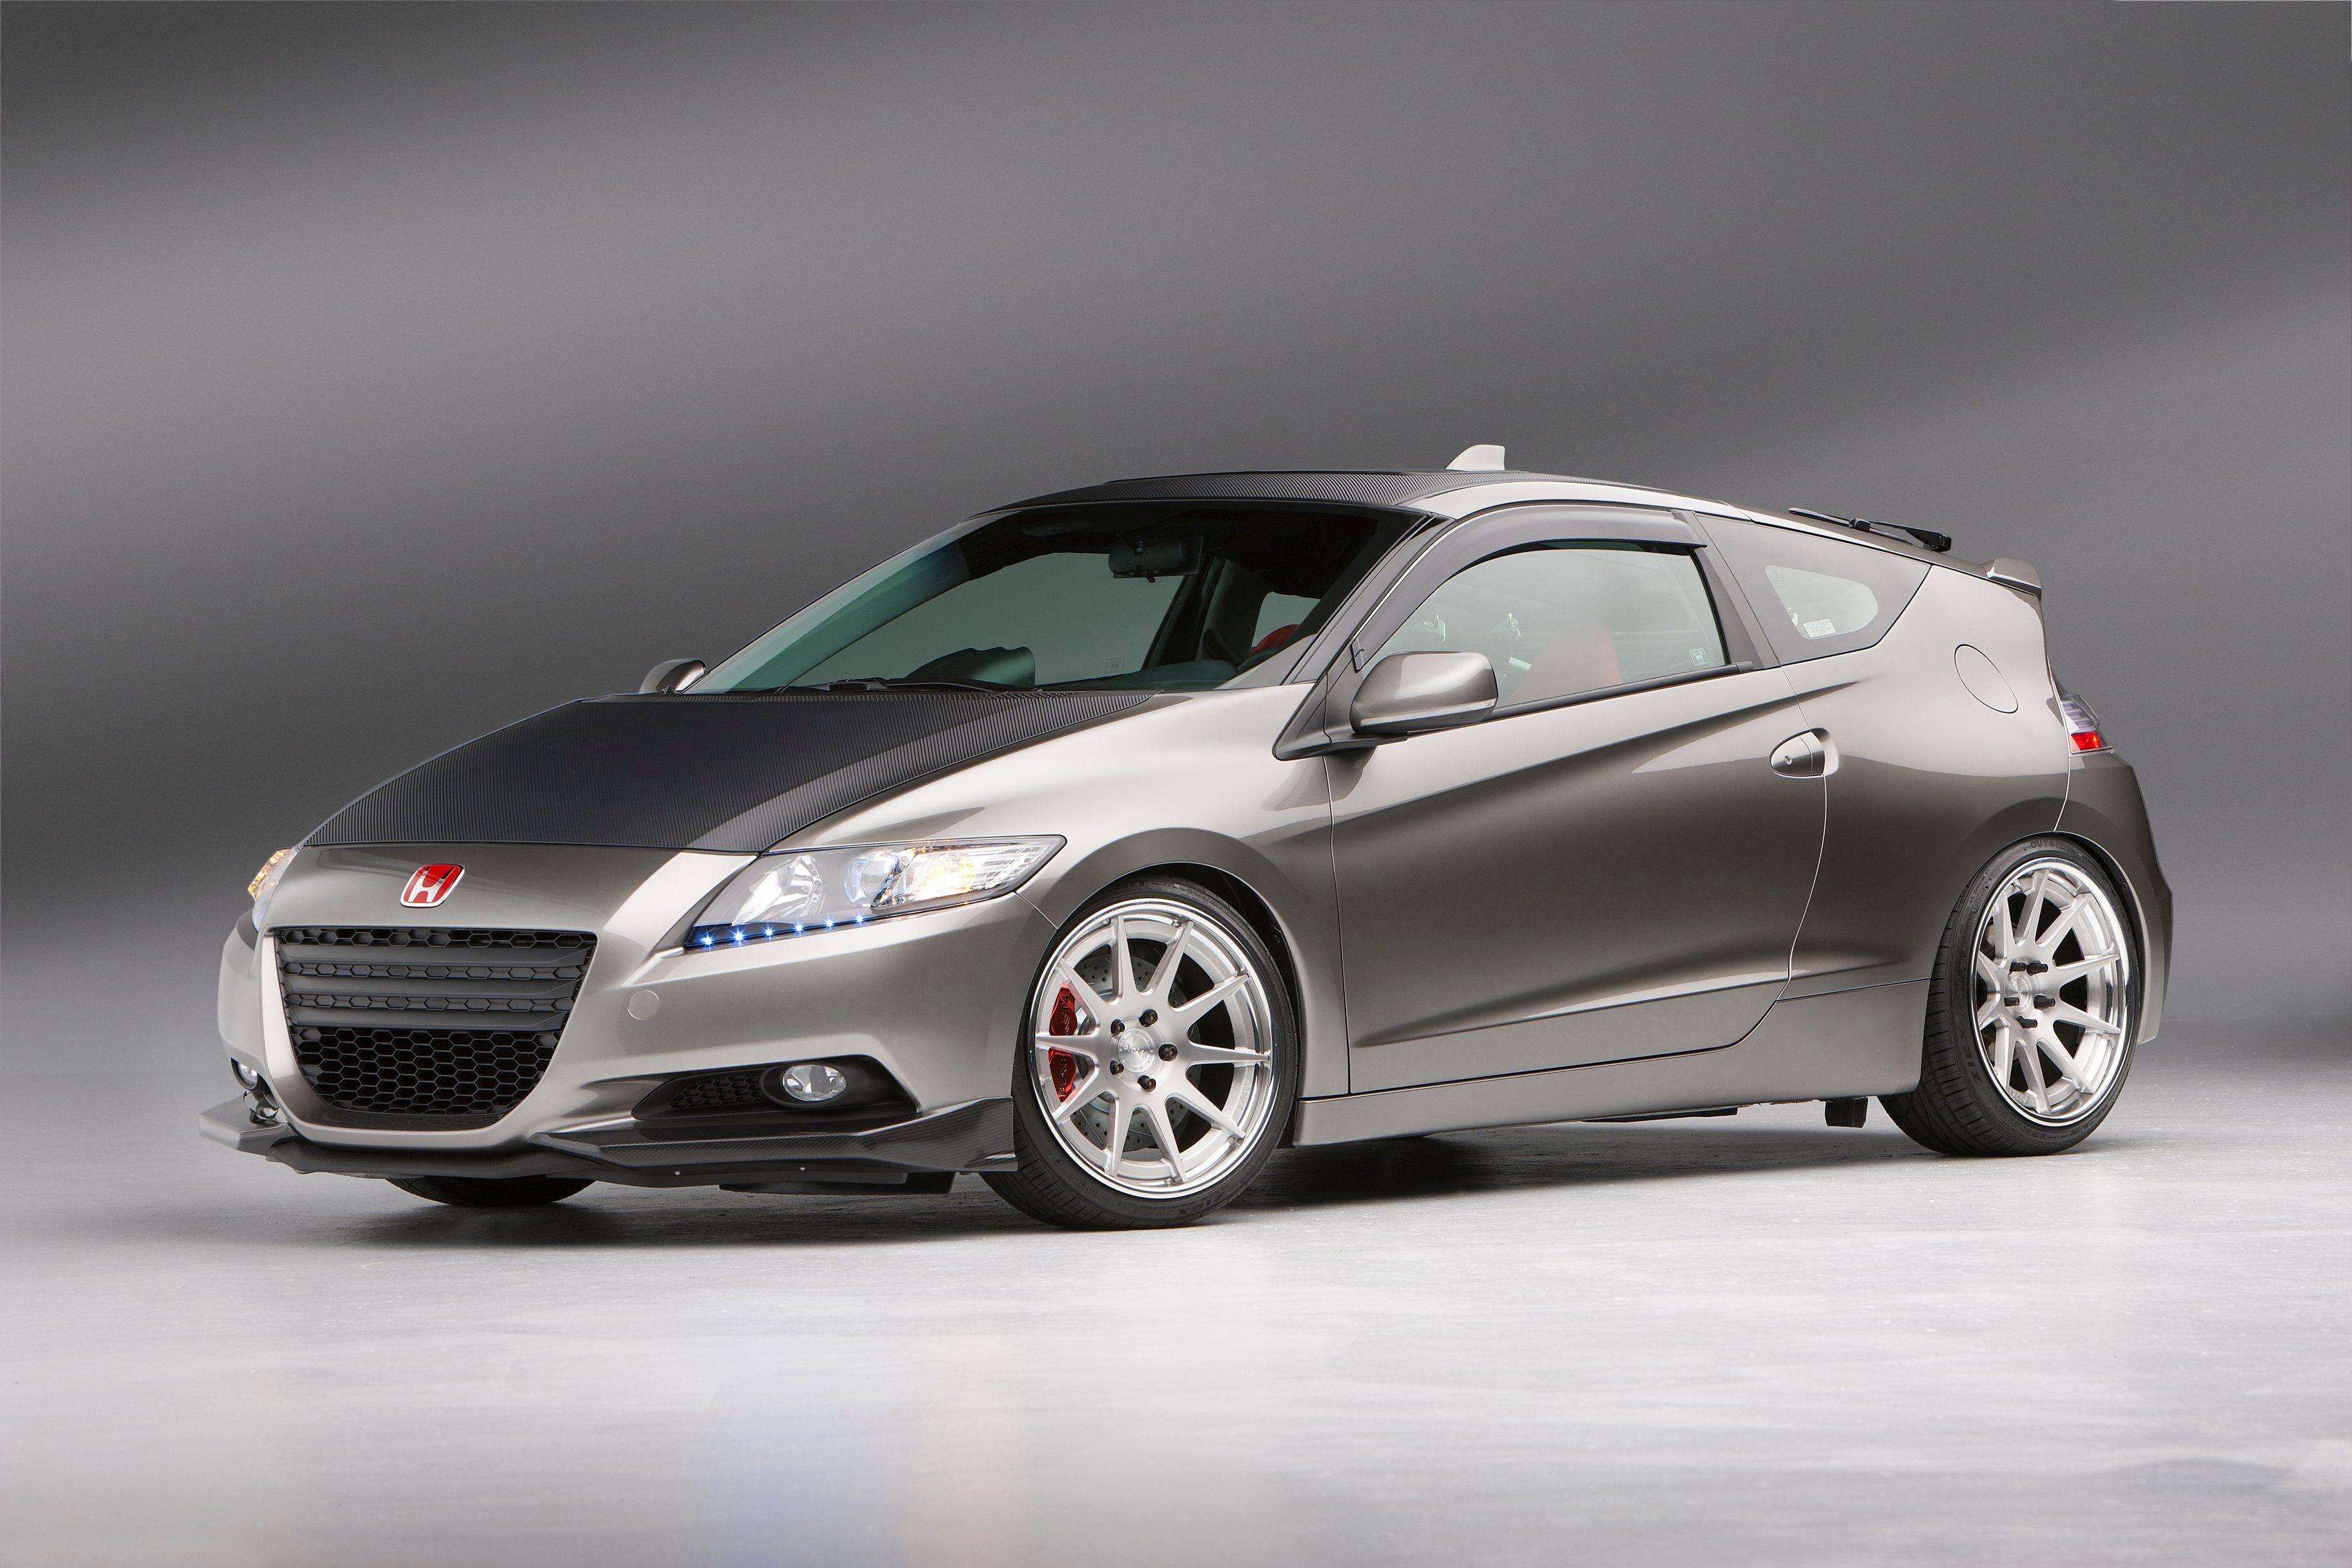 An All-Electric Sports Car Based on Honda CRZ Under Work